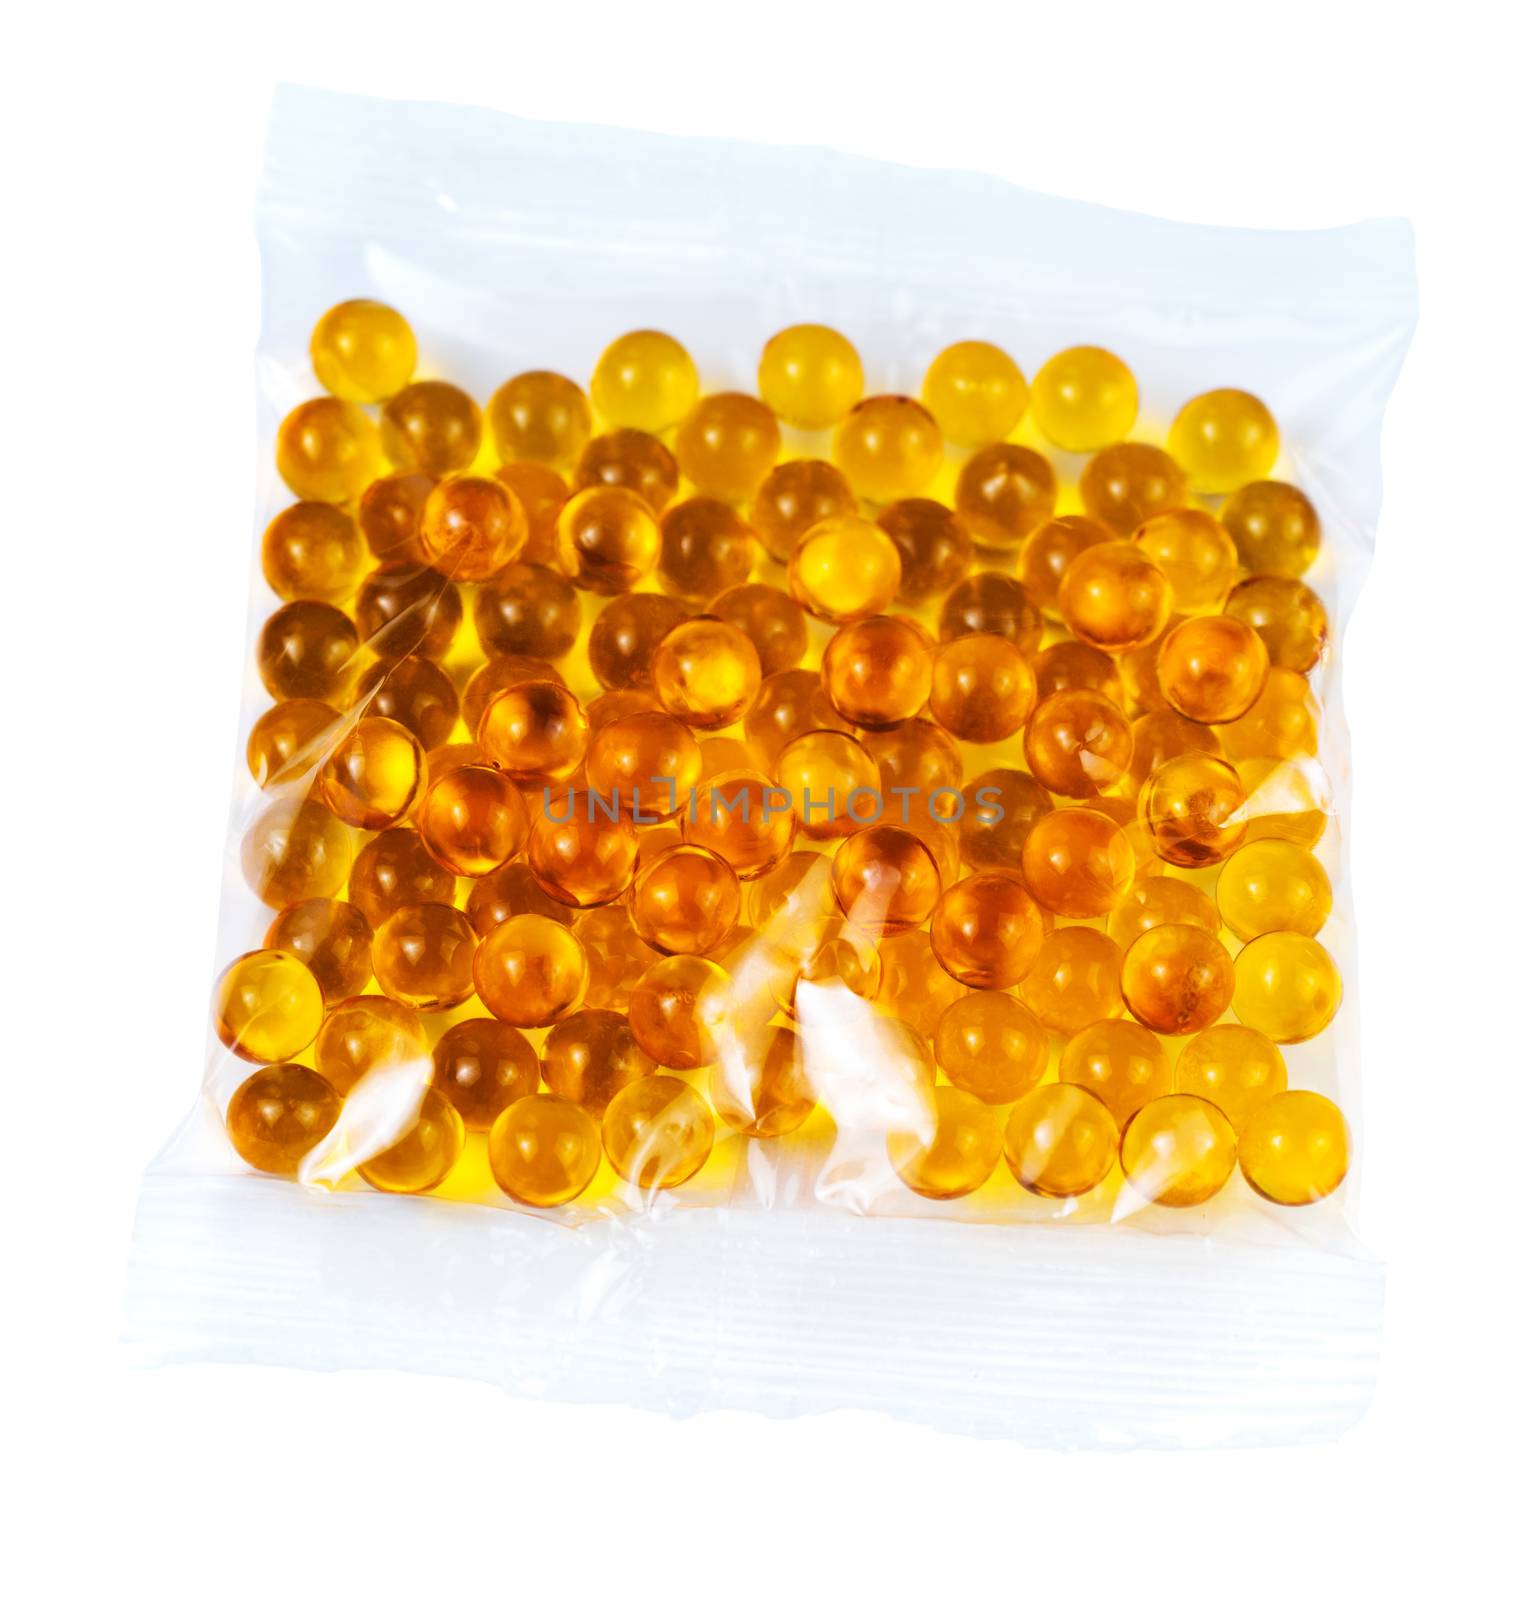 orange spherical ball capsules of fish oil in plastic bag isolated on white background.